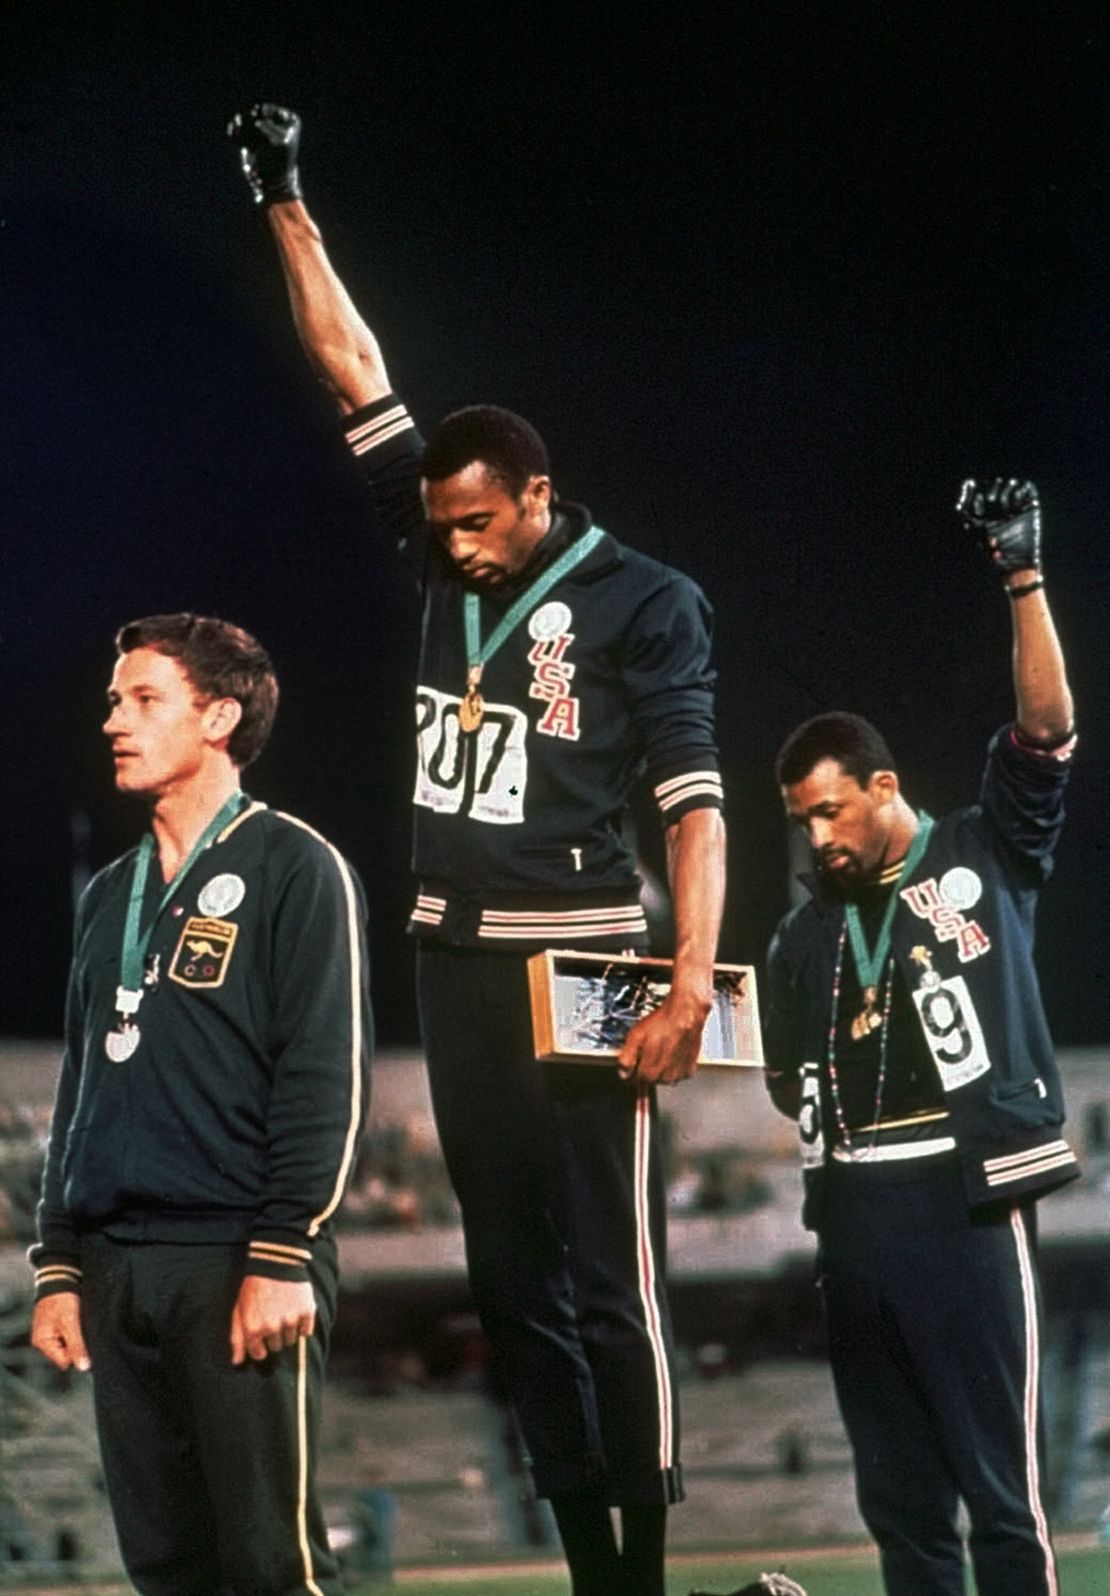 Tommie Smith, center, and John Carlos, right, raise their fists while standing on the podium at the 1968 Mexico Olympics.